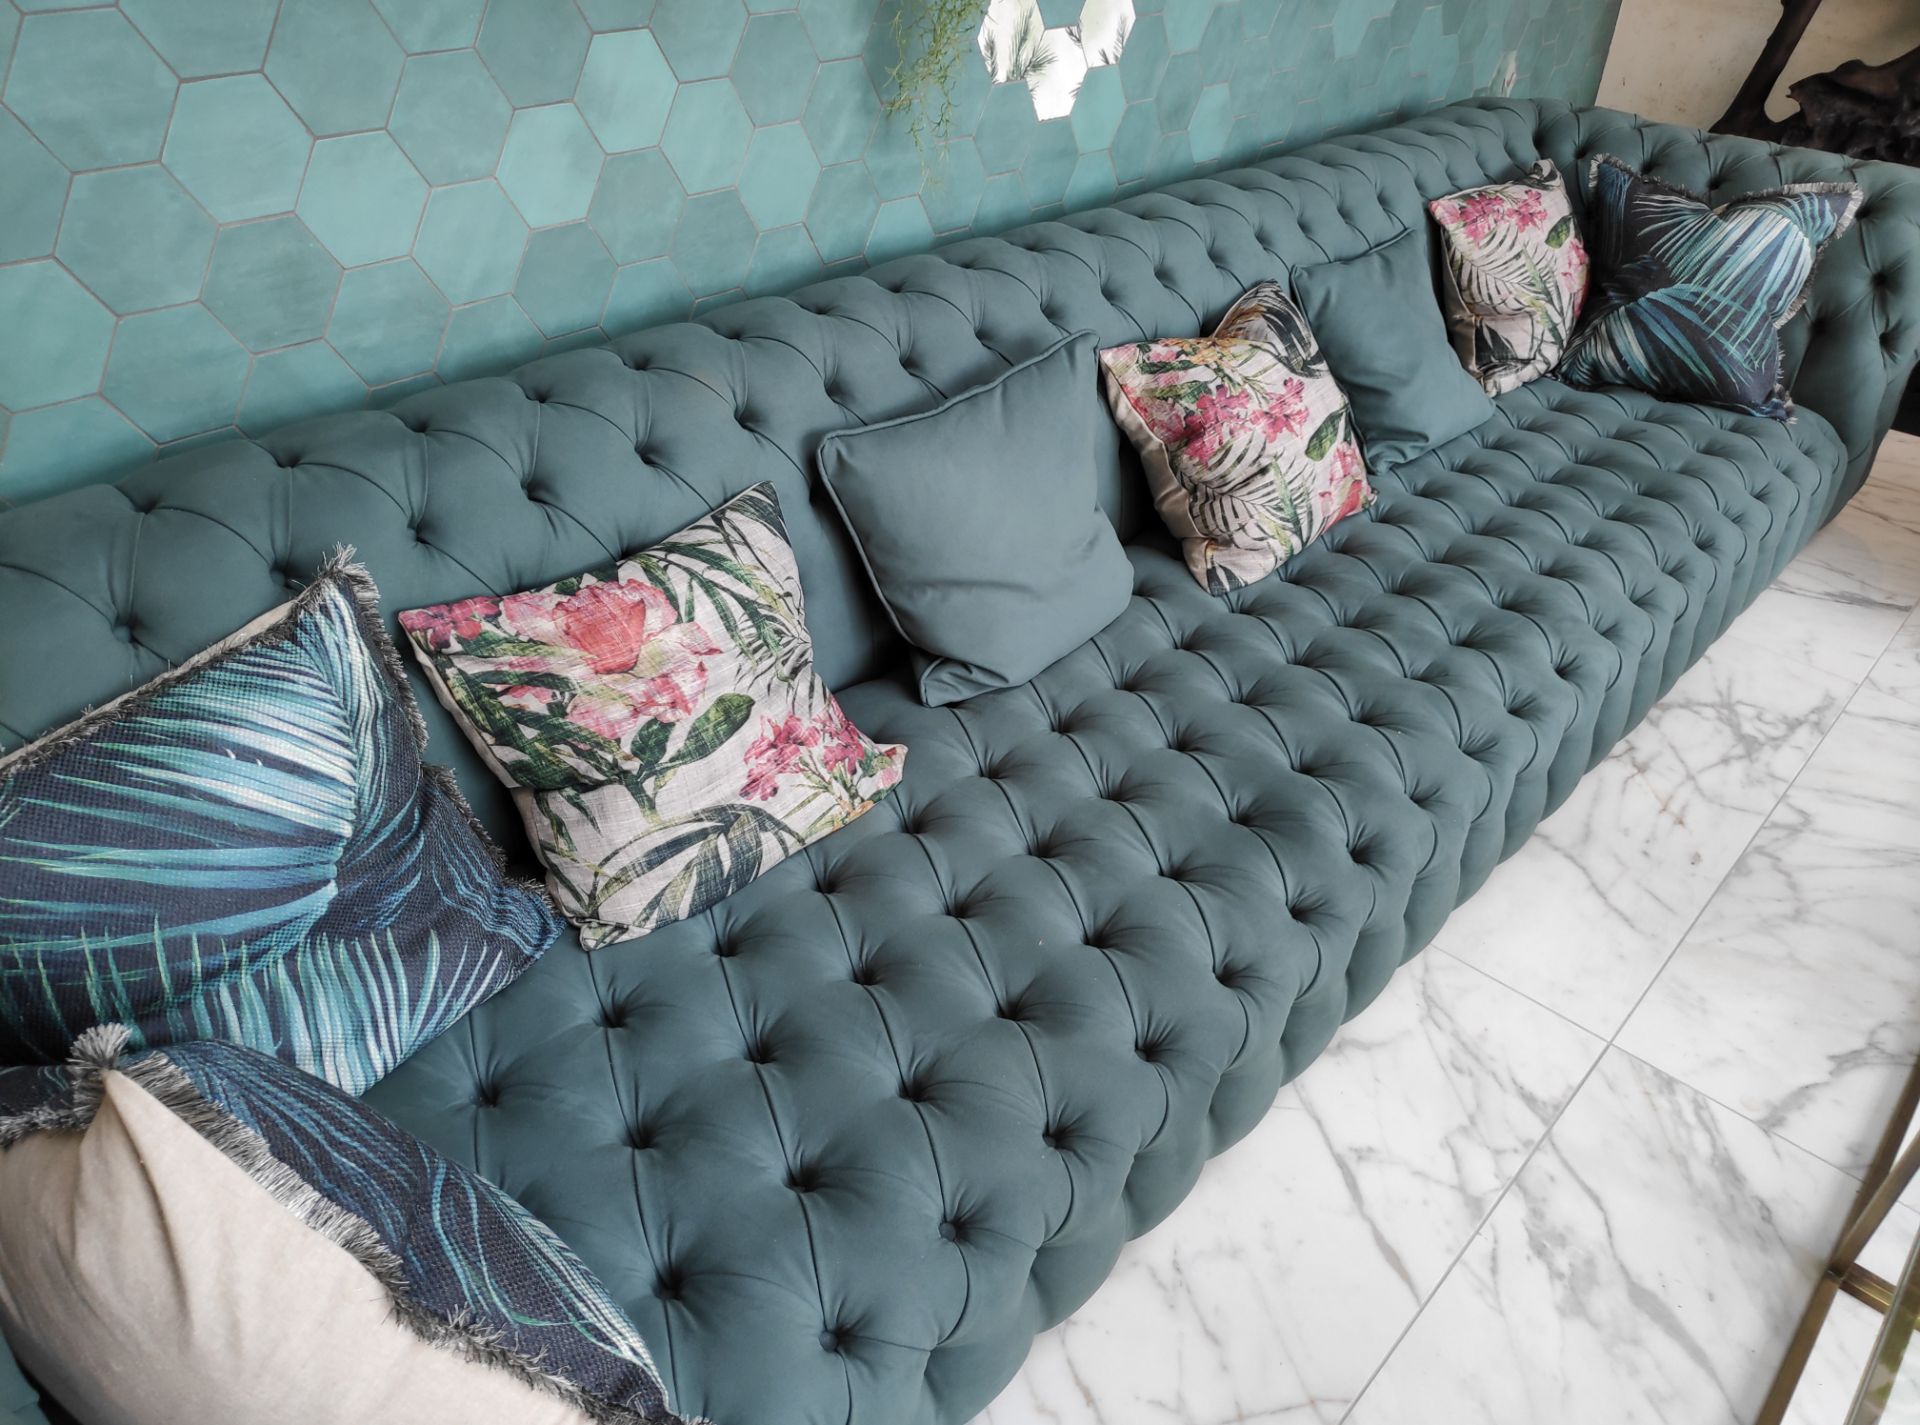 1 x Bespoke 3.8m Baxter-style Chesterfield Sofa in Green - Dimensions: W380 x H77cm - Includes - Image 6 of 7